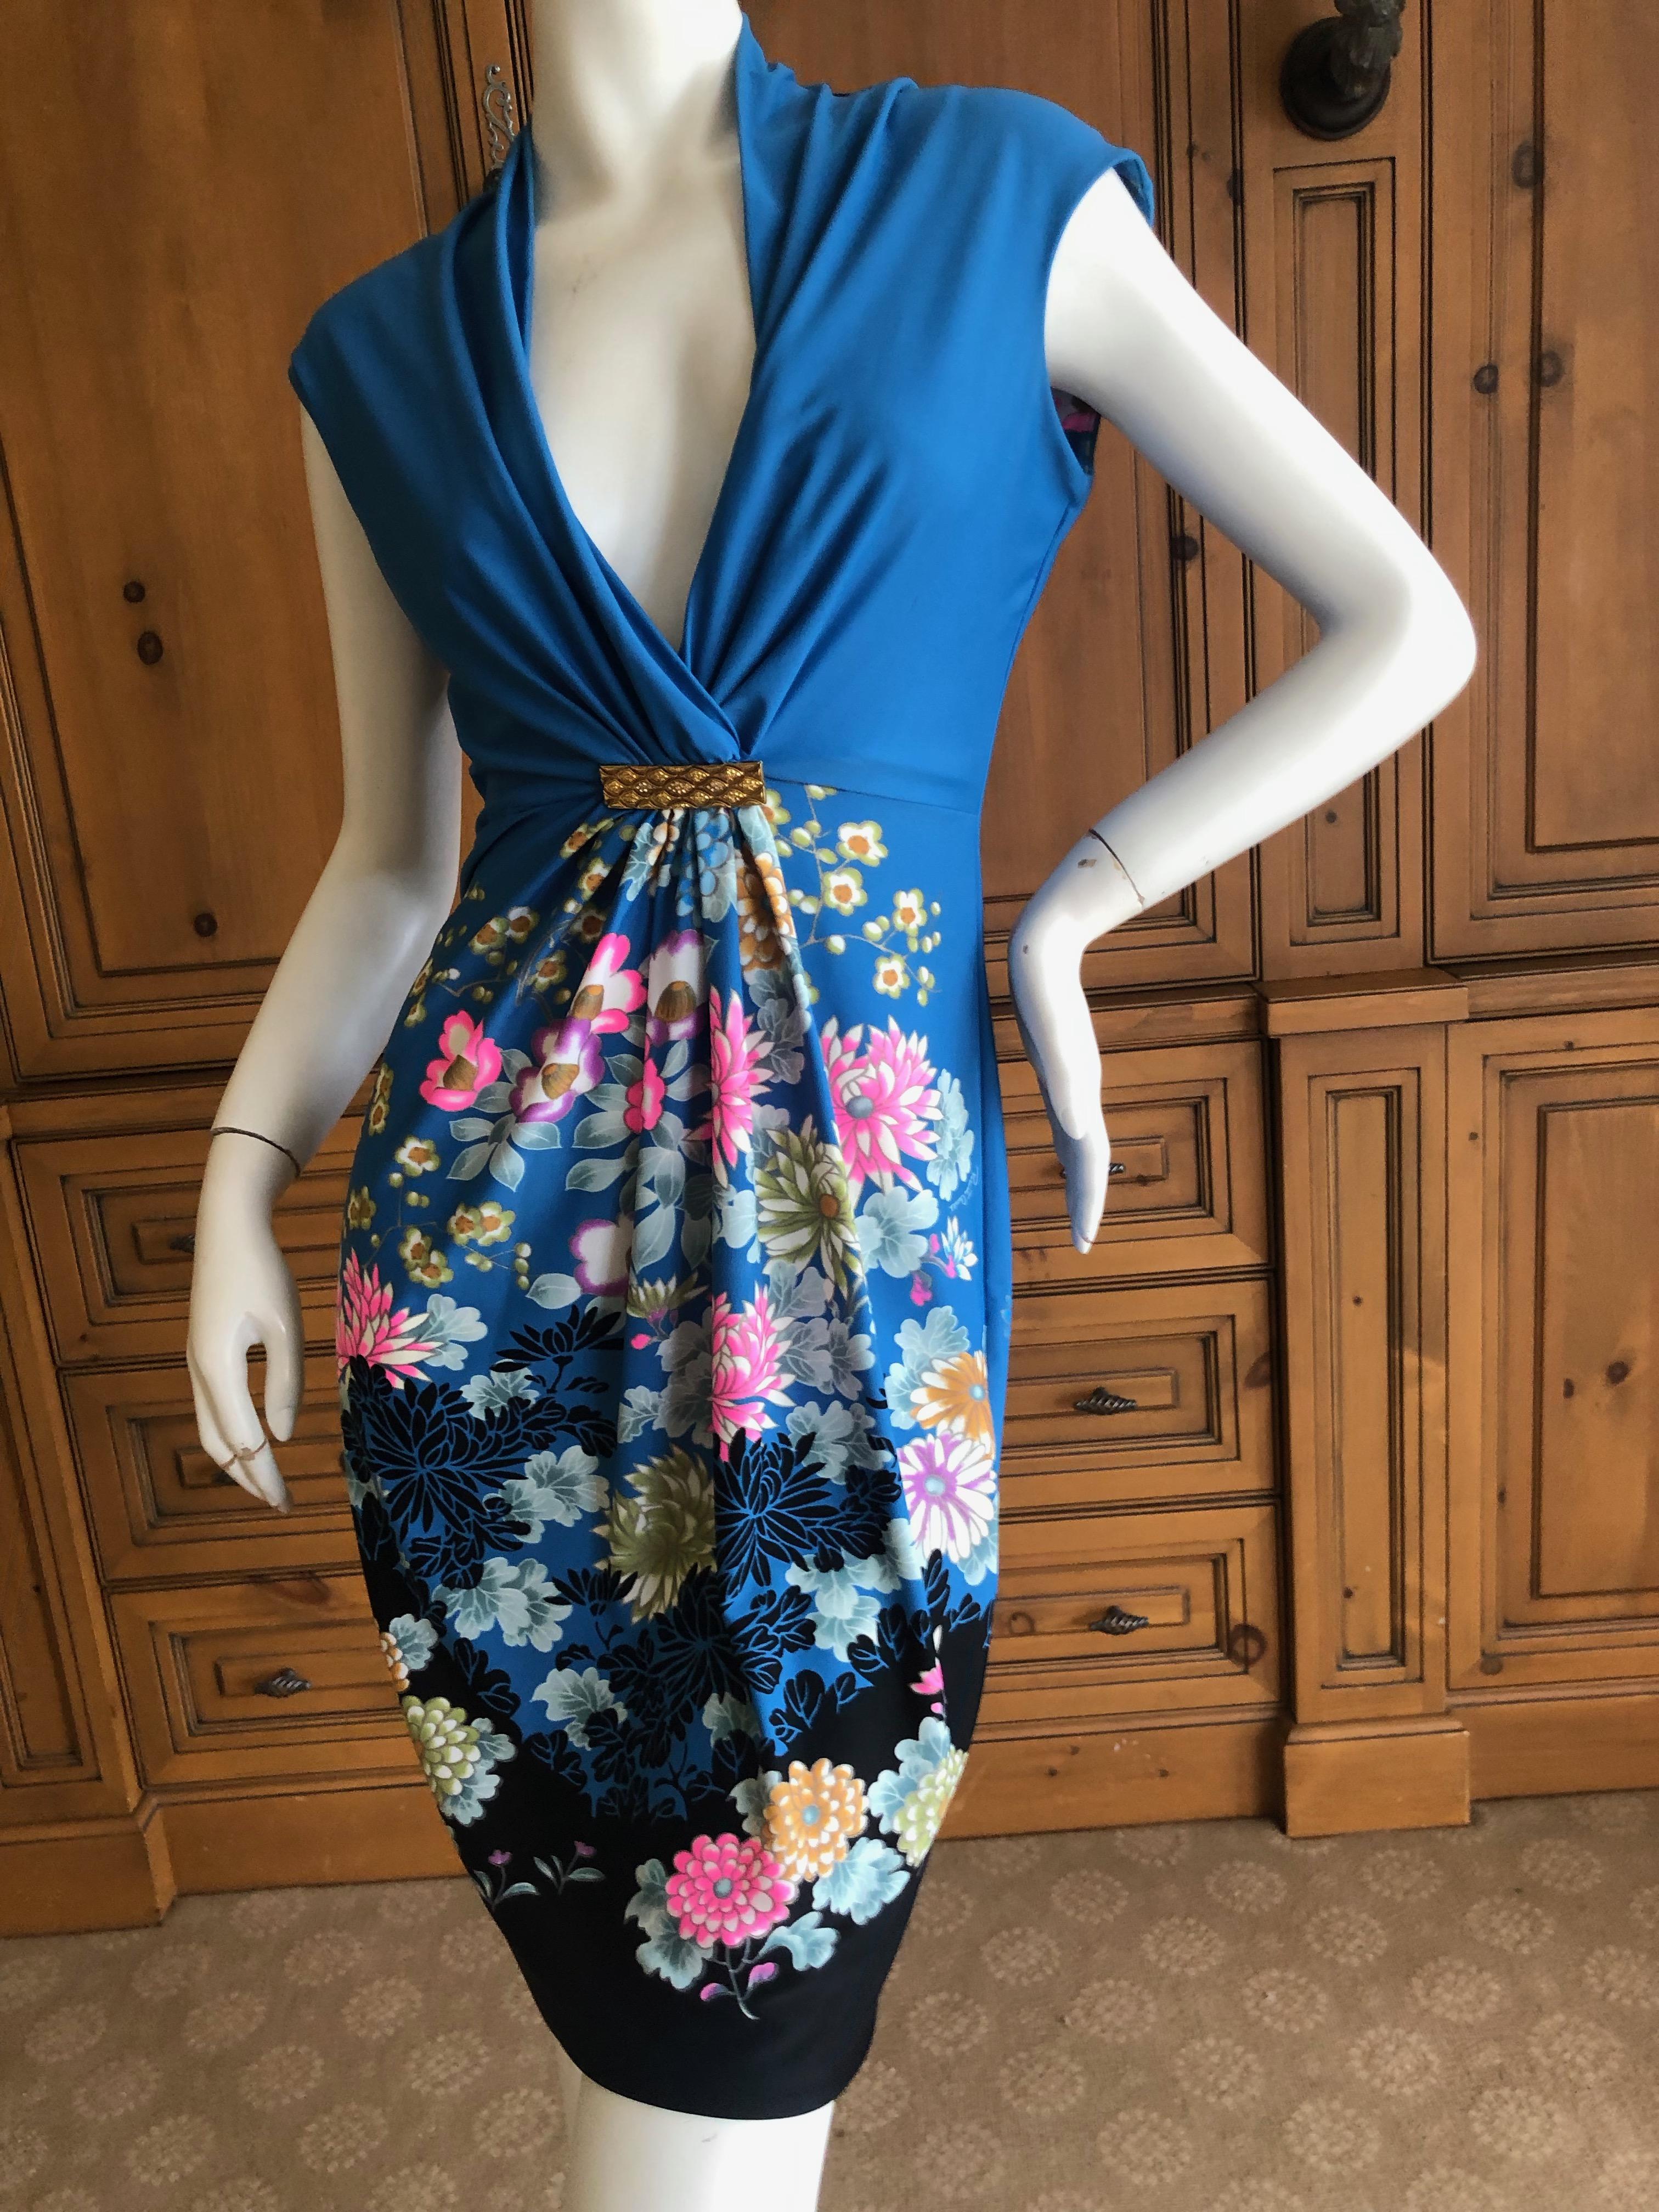 Roberto Cavalli Chinoiserie Floral Pattern Cocktail Dress   In Excellent Condition For Sale In Cloverdale, CA